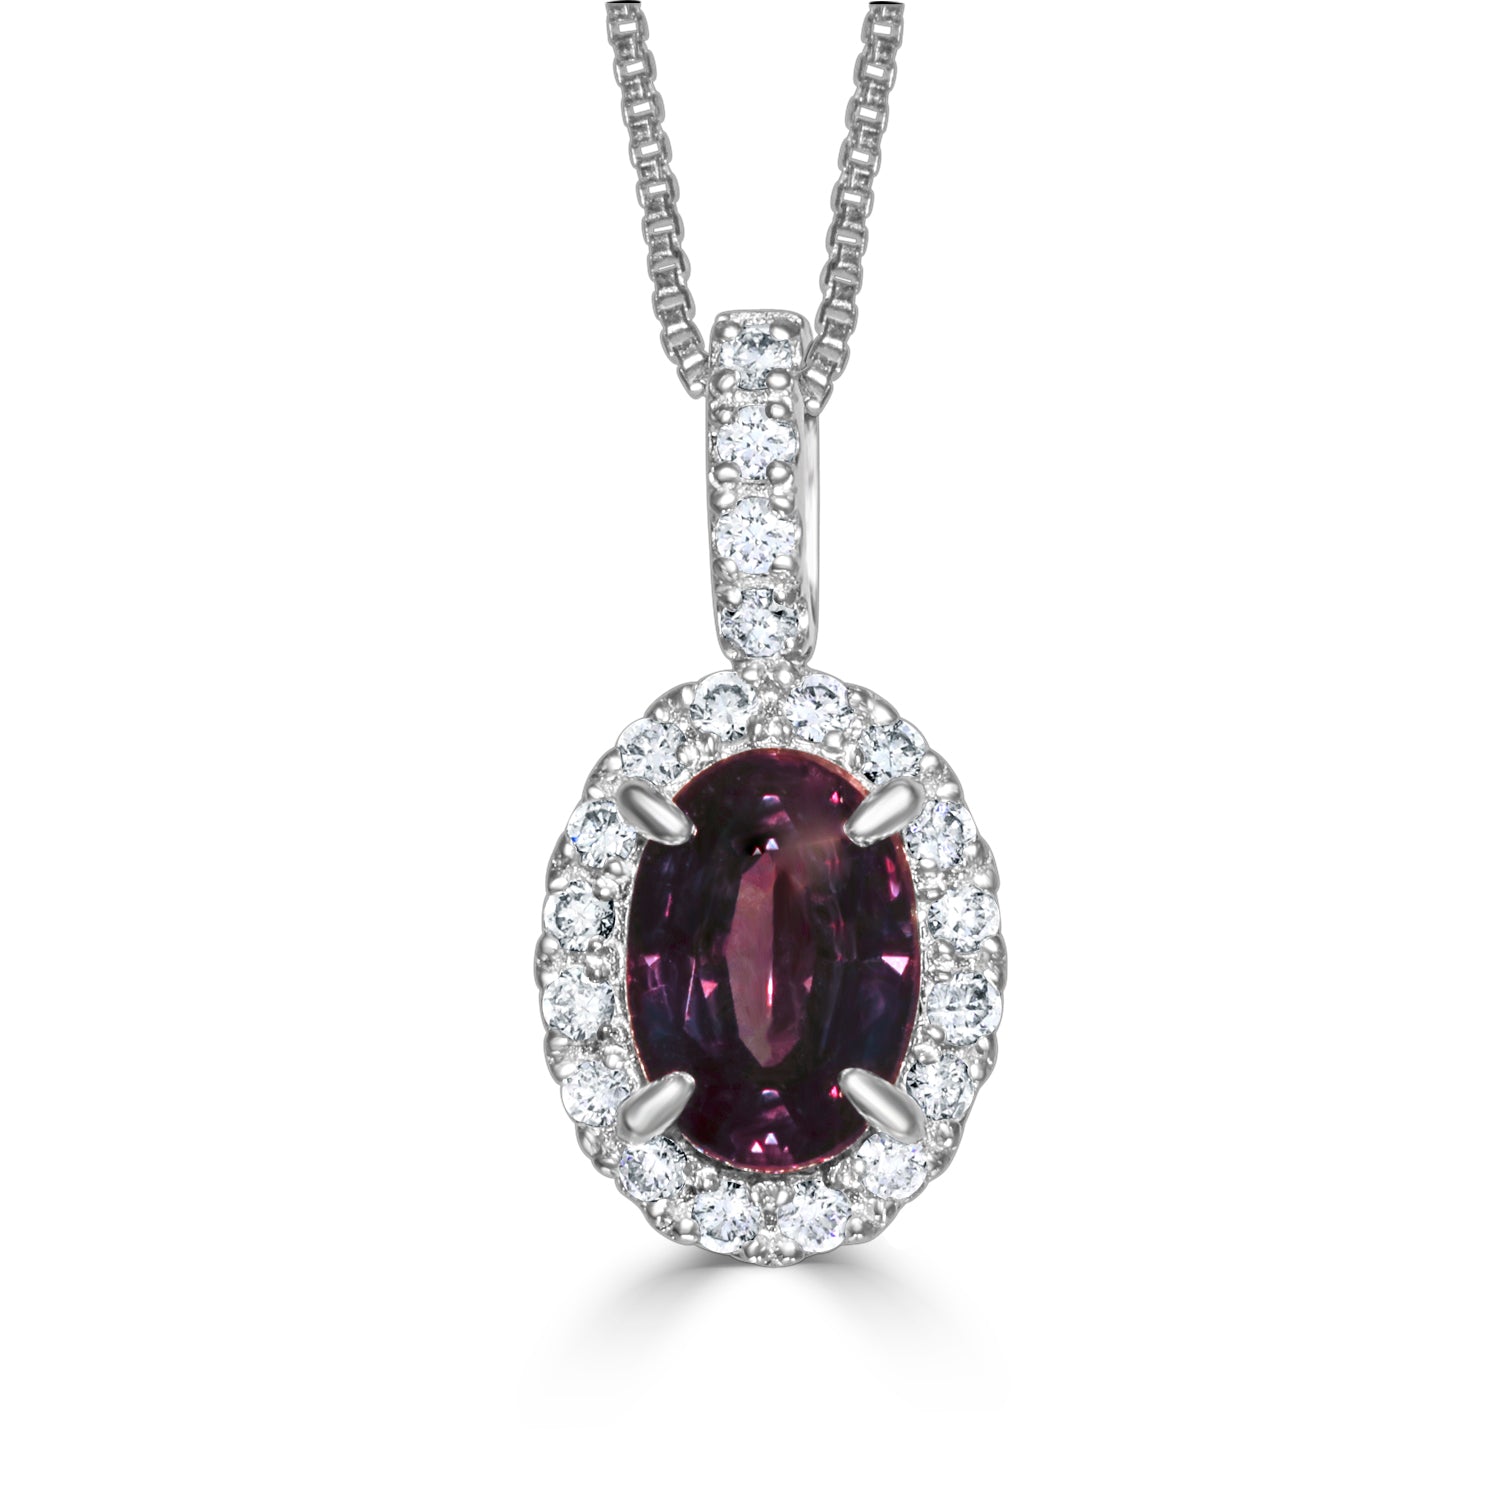 Natural Alexandrite Pendant Necklace in 18K White Gold - Etsy